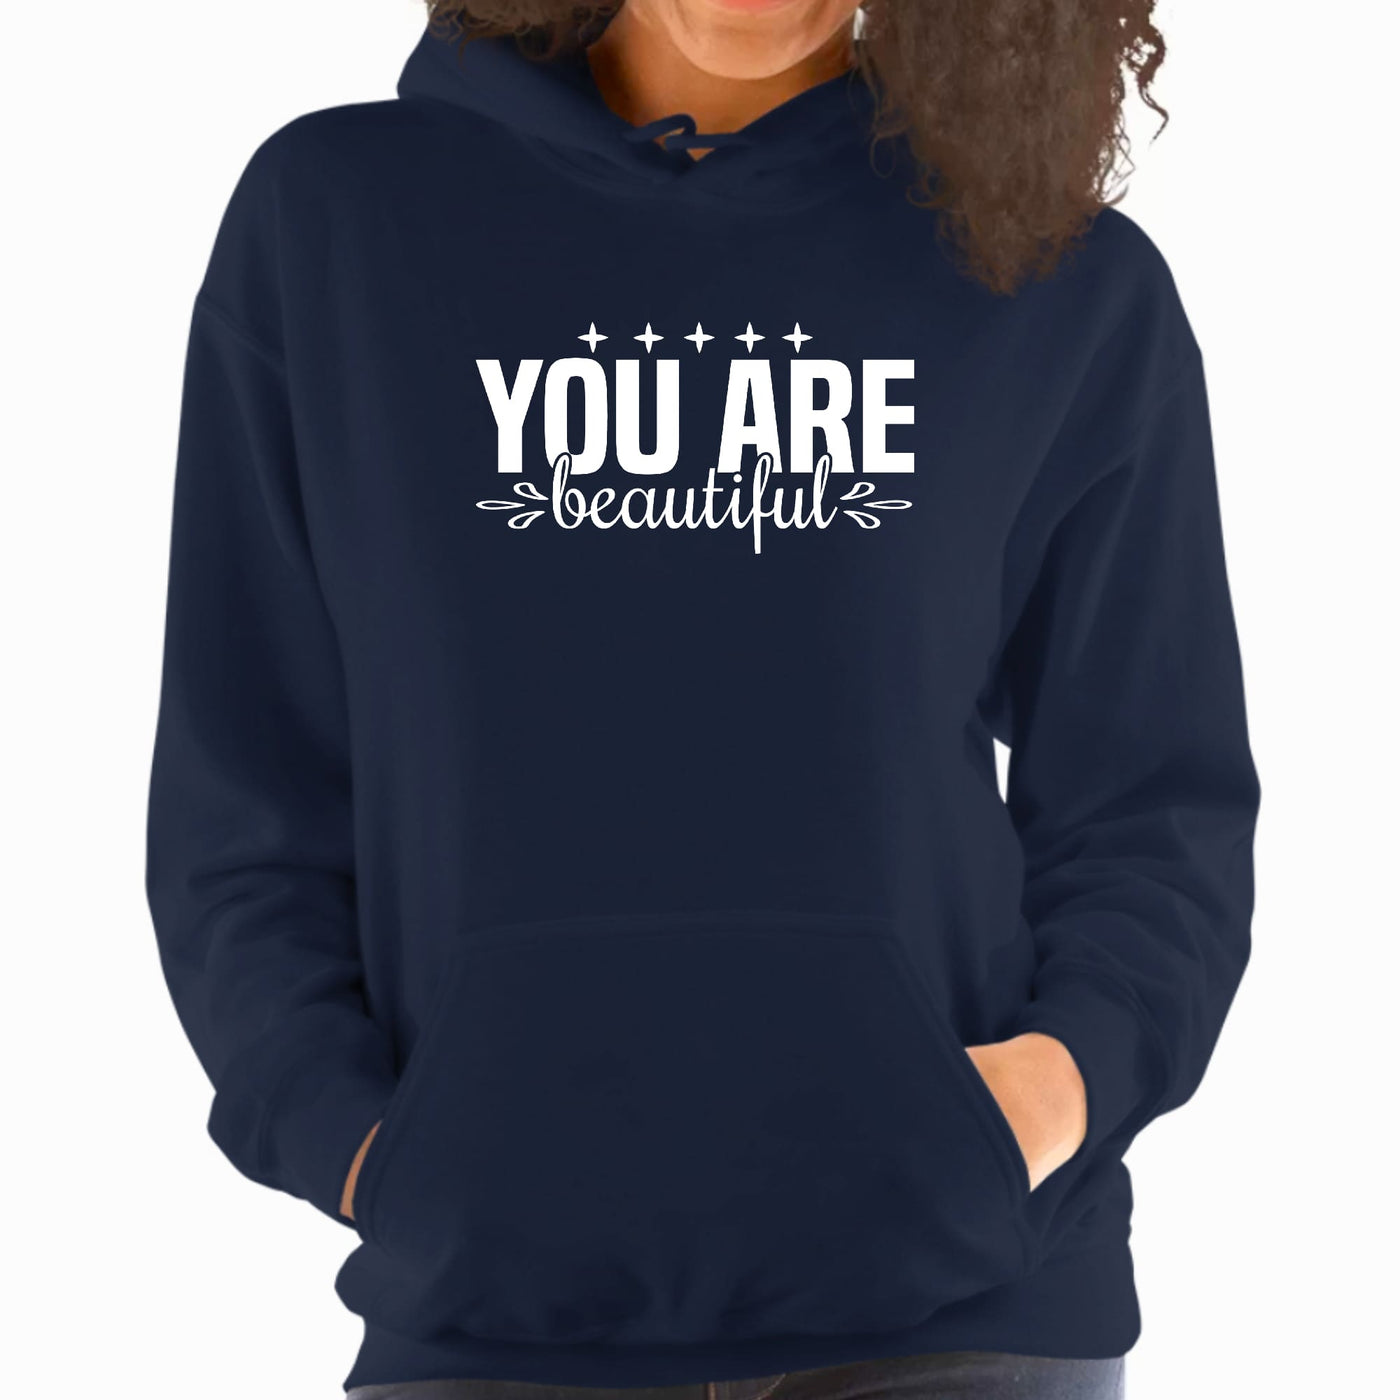 Womens Hoodie You Are Beautiful Inspiration Affirmation - Womens | Hoodies